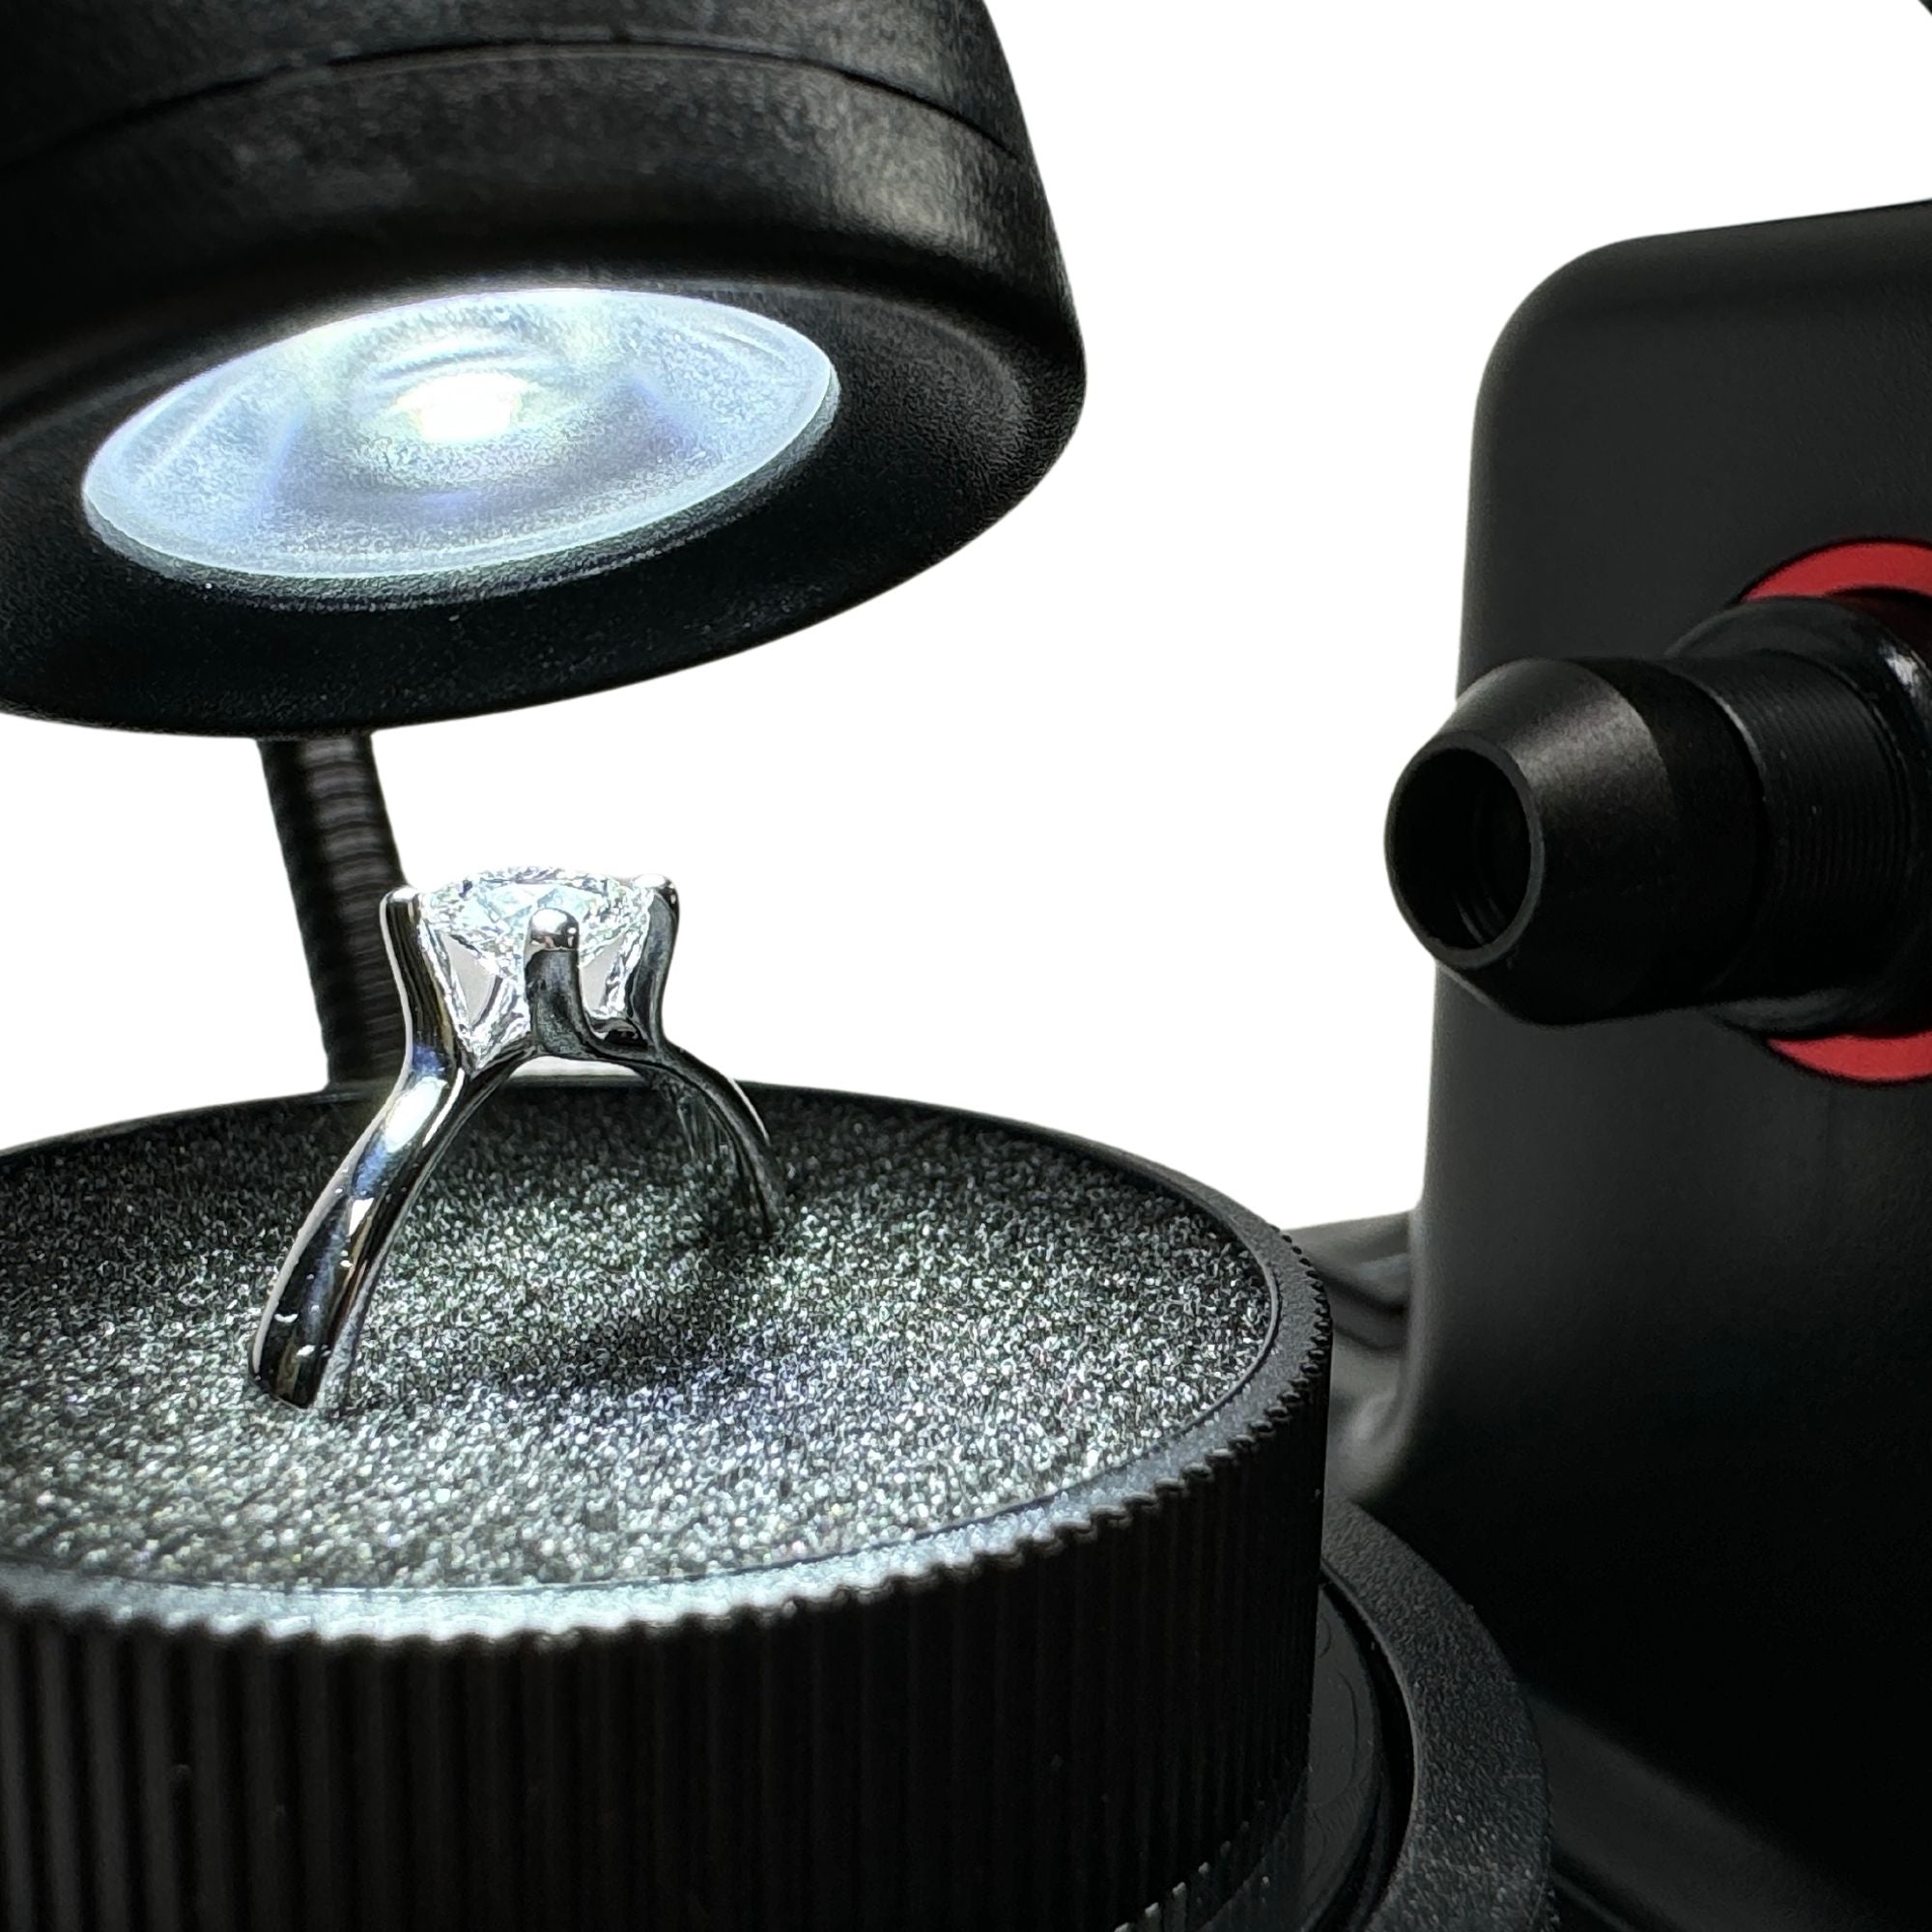 Digital Laser Inscription Viewer Microscope to display the laser inscribed number on a diamond girdle